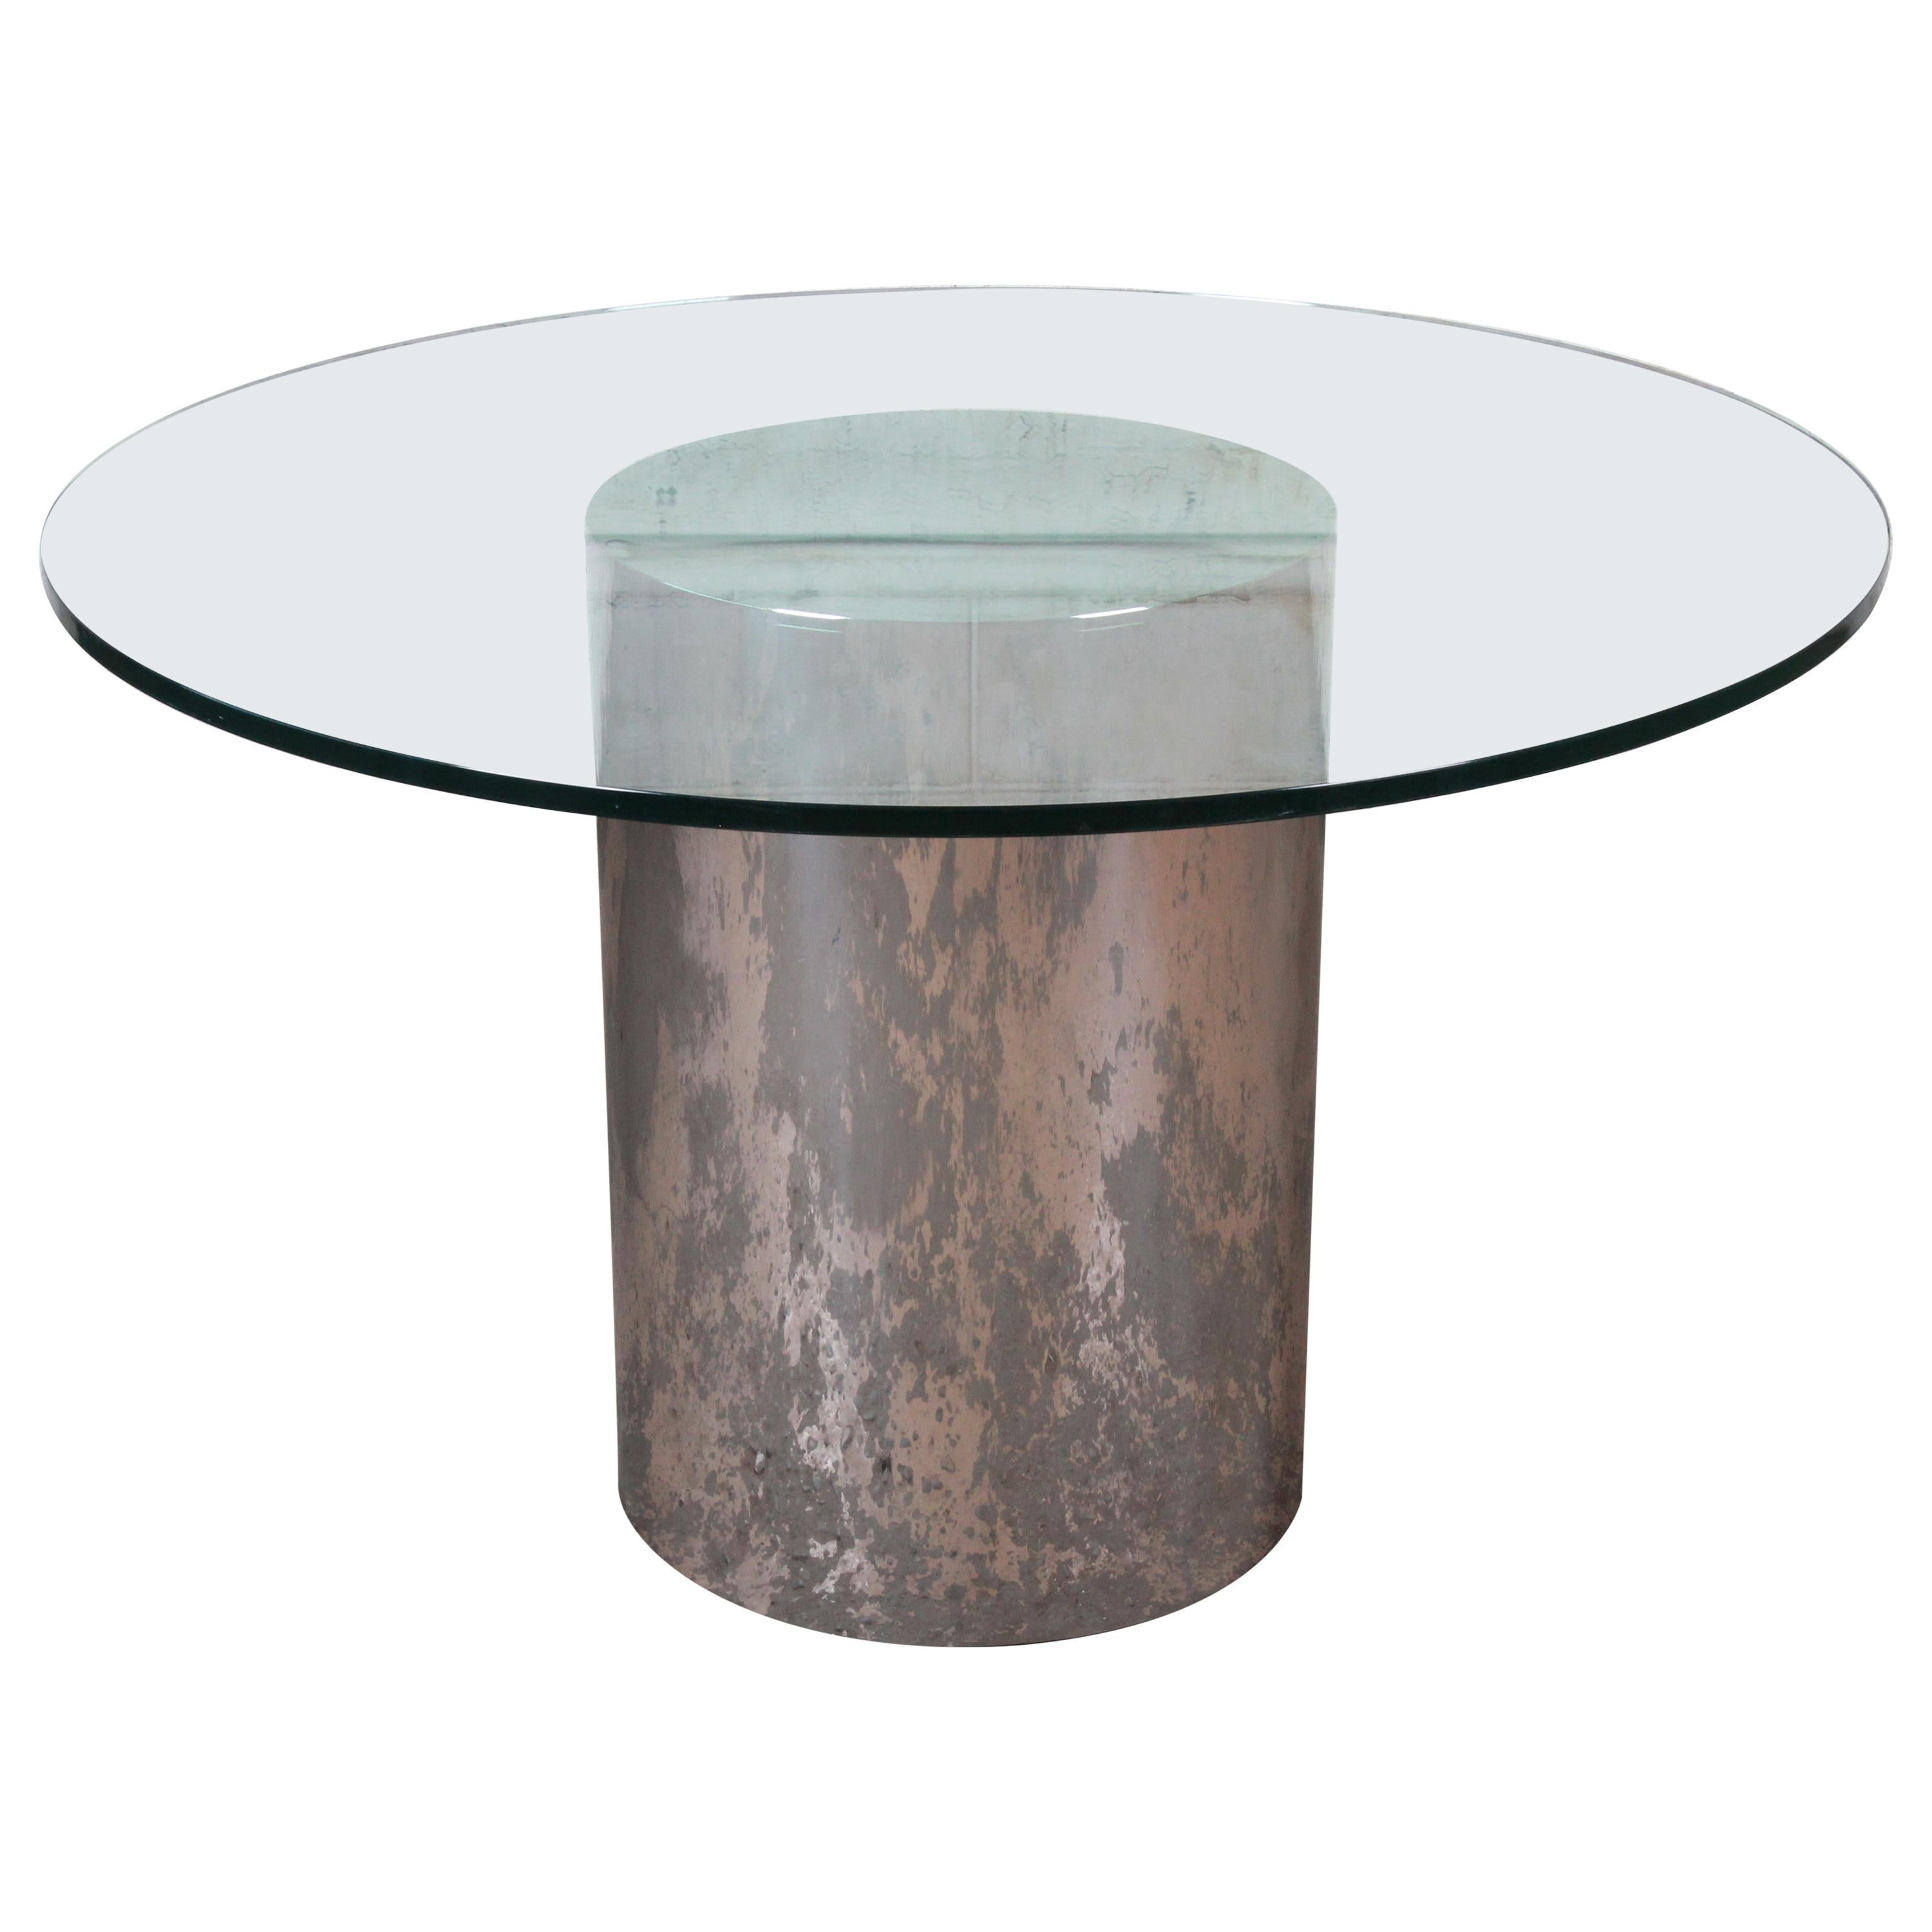 Brueton Mid-Century Modern Polished Steel and Glass Round Pedestal Dining Table